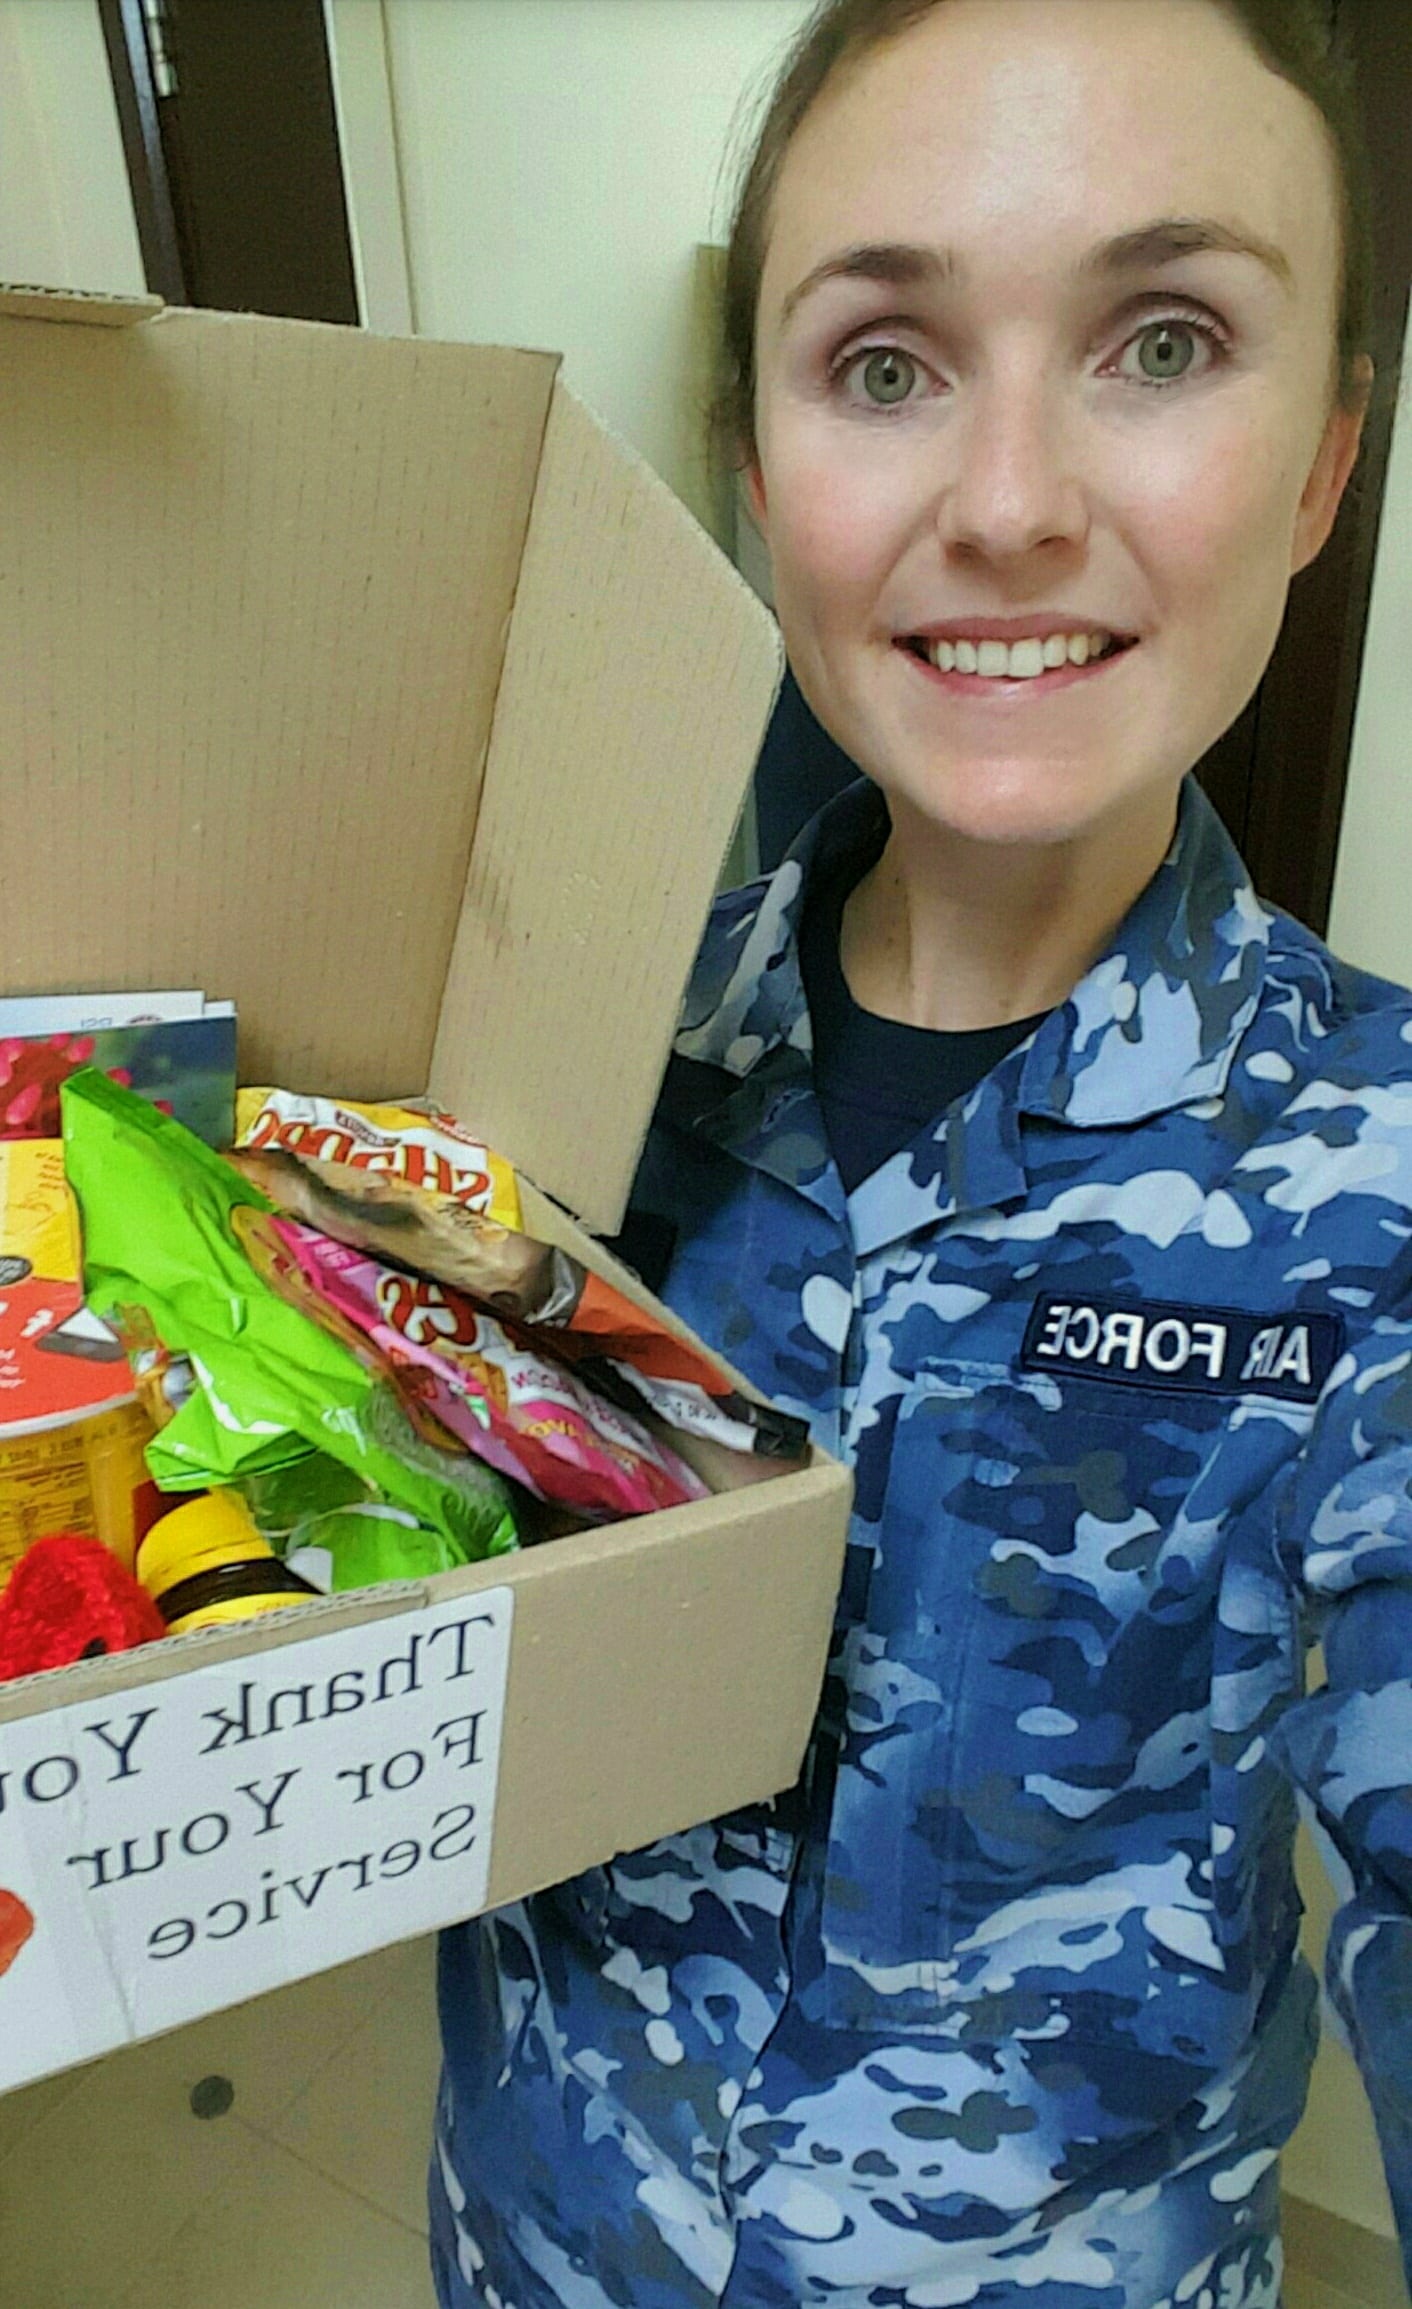 Goody-Bag-for-Australian-Defence-Forces-personnel-sent-by-residents-of-RSL-lifeCare | RSL LifeCare - provide care and service to war veterans, retirement villages and accommodation, aged care services and assisted living